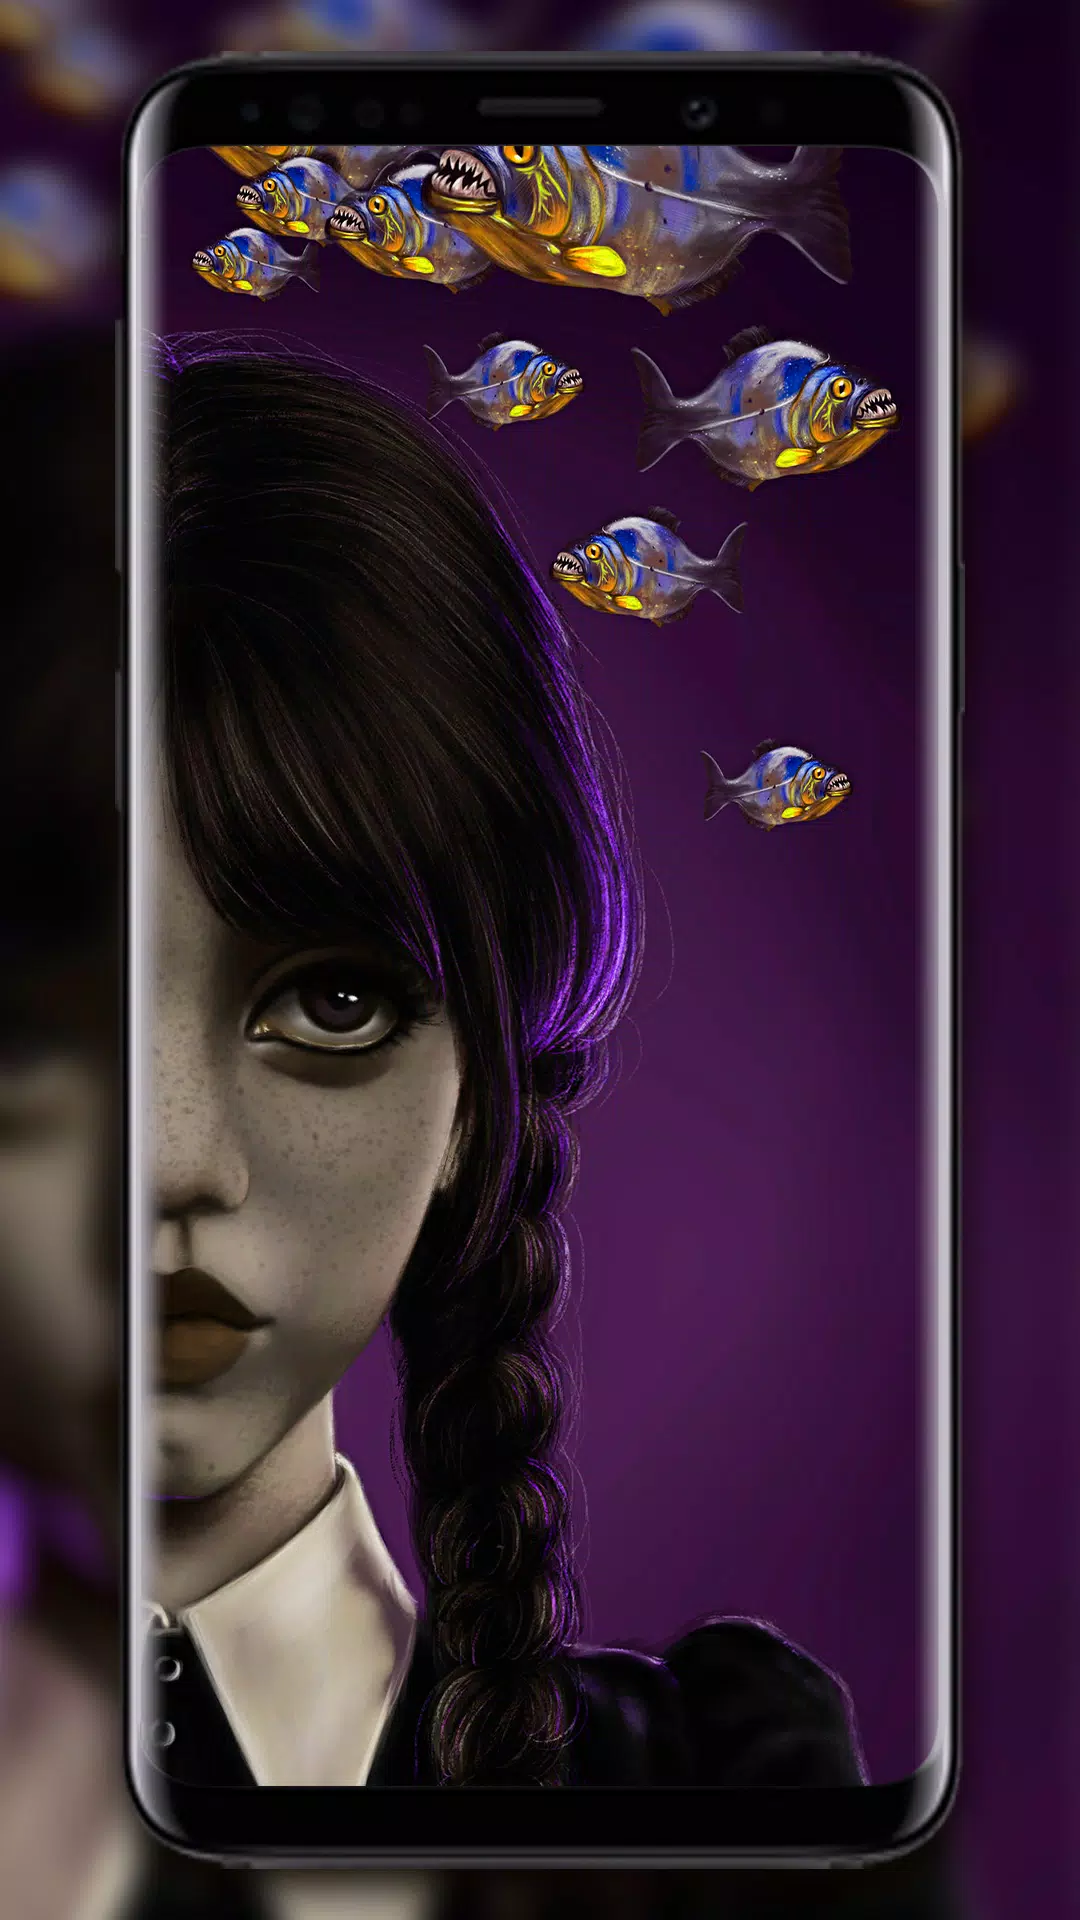 Tải xuống APK Wednesday Addams Wallpaper cho Android